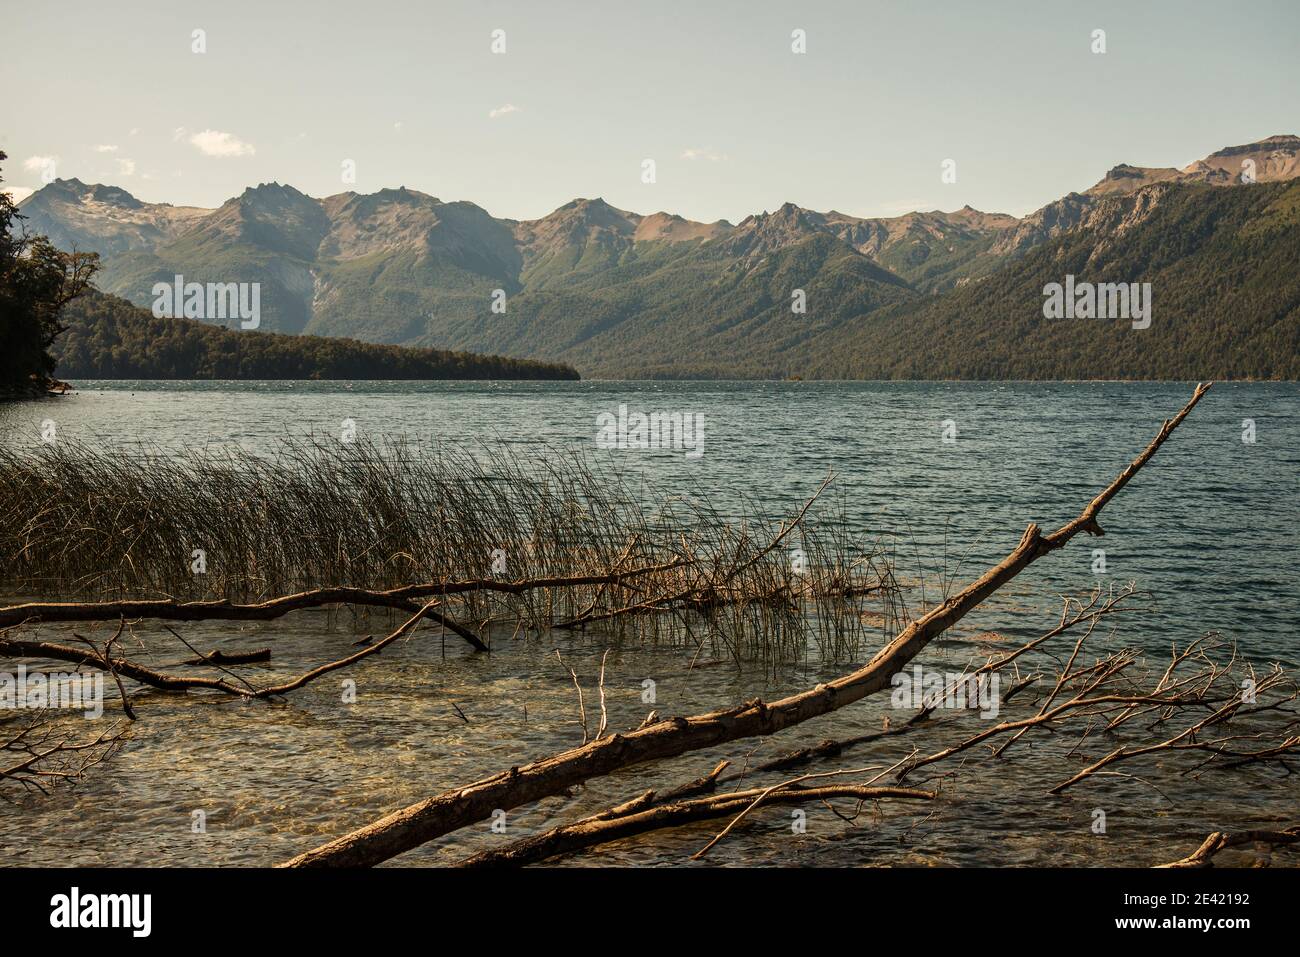 view of the landscape of Patagonia, Argentina, on the Traful lake. lake plants and dead trees in the foreground Stock Photo